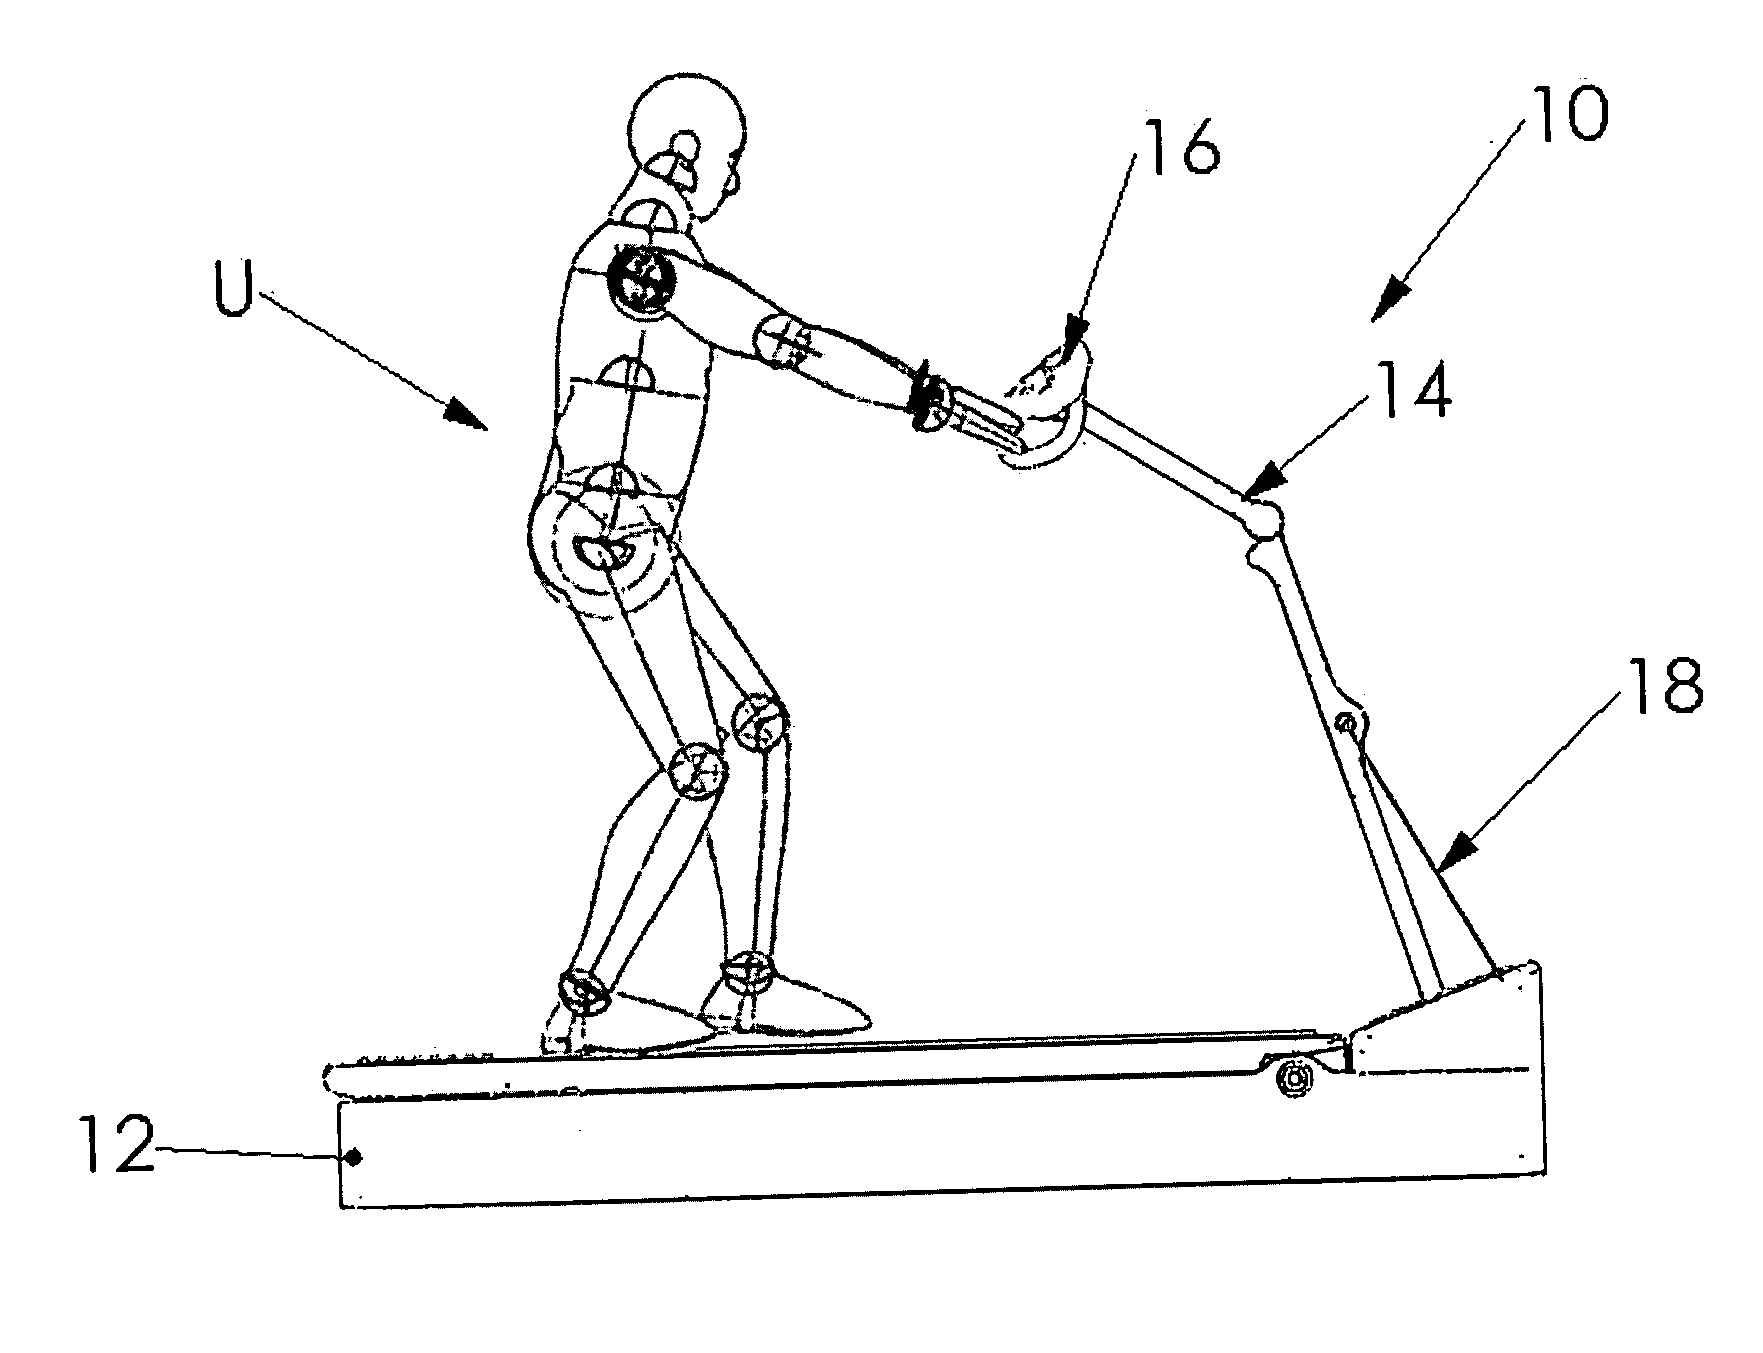 Exercise treadmill for pulling and dragging action